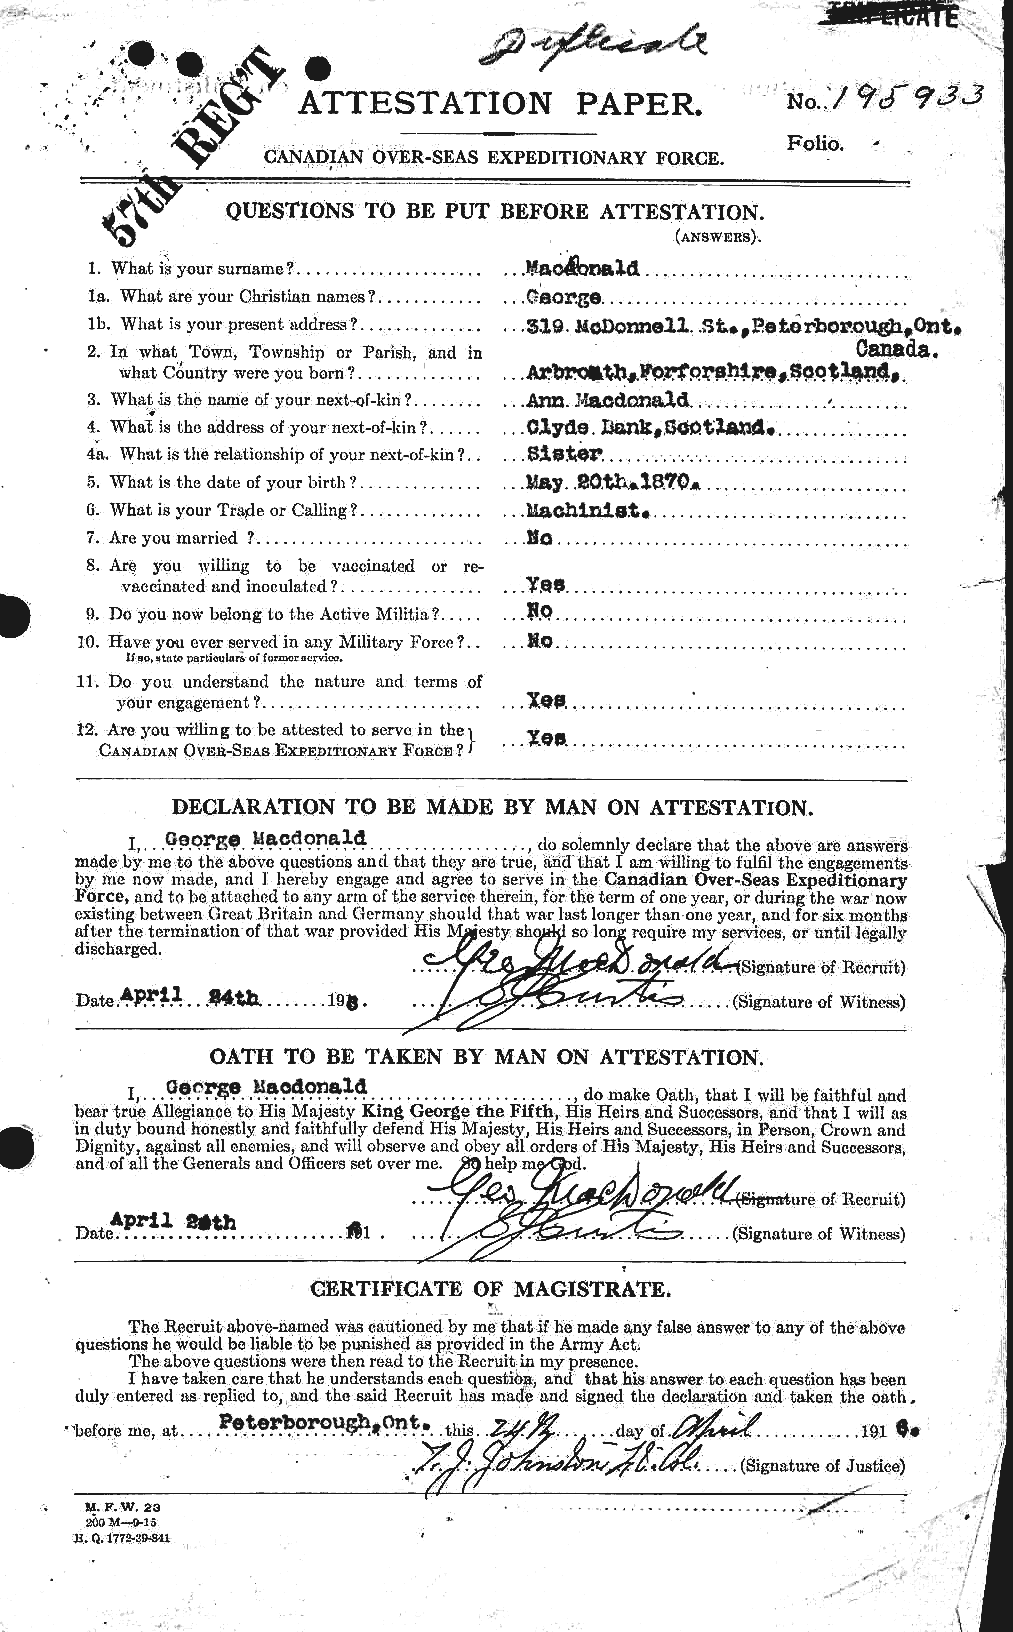 Personnel Records of the First World War - CEF 518769a